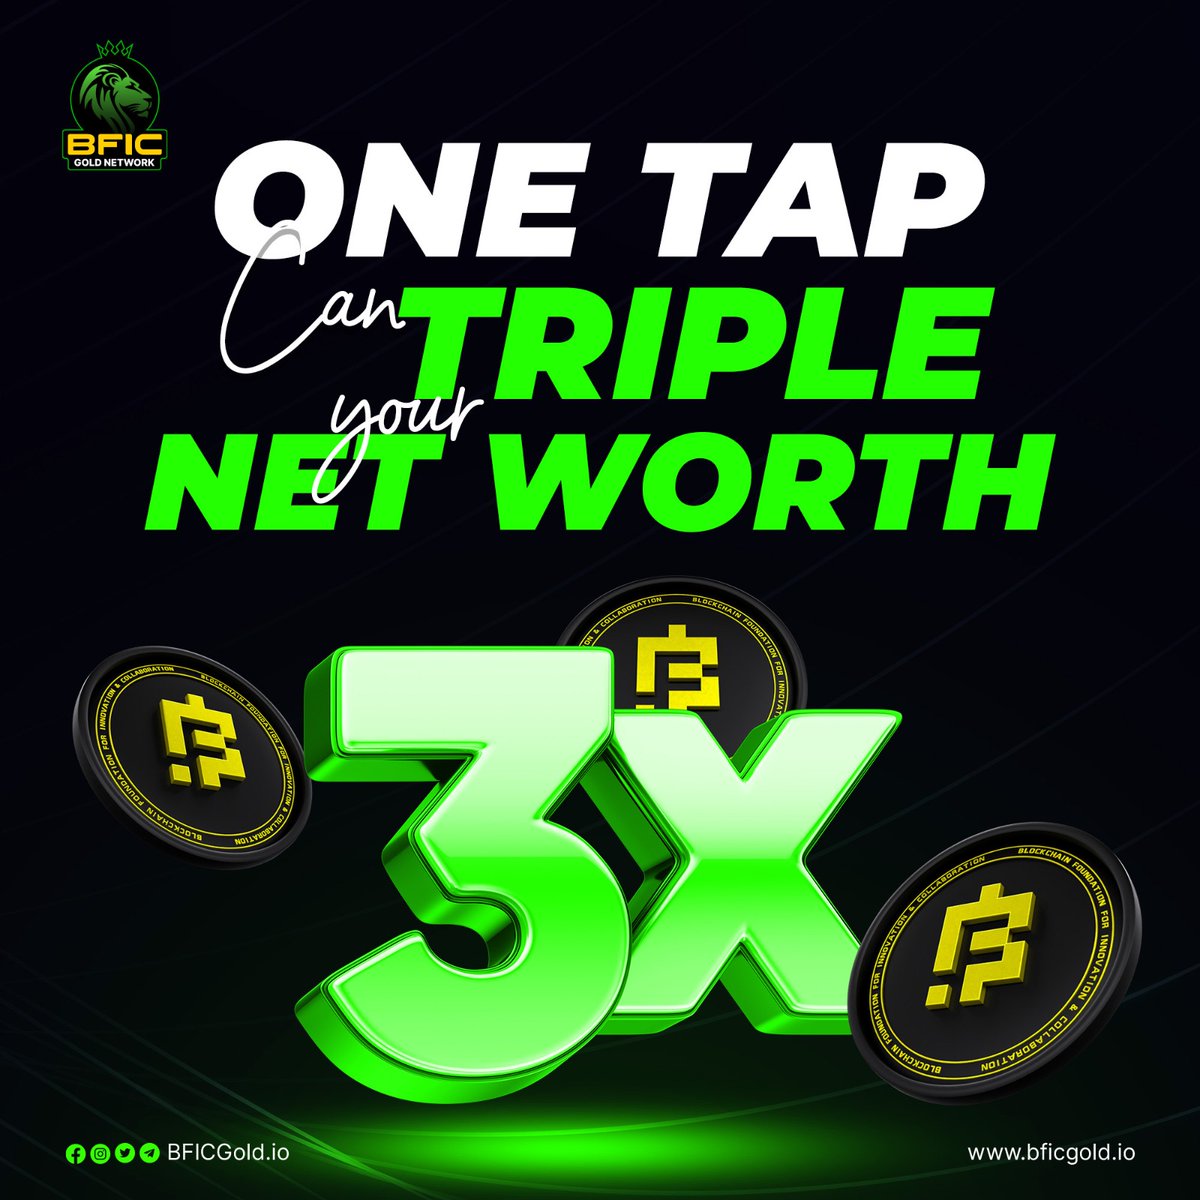 Ready to 3x your BFIC❓

The BFIC Gold Network isn't just staking, it's a wealth-building machine, Just one tap opens the door to tripling your BFIC net worth,
Fuel your financial goals at 3x the speed!

Download the App,
keep staking, and keep earning with BFICGold Network! 📲